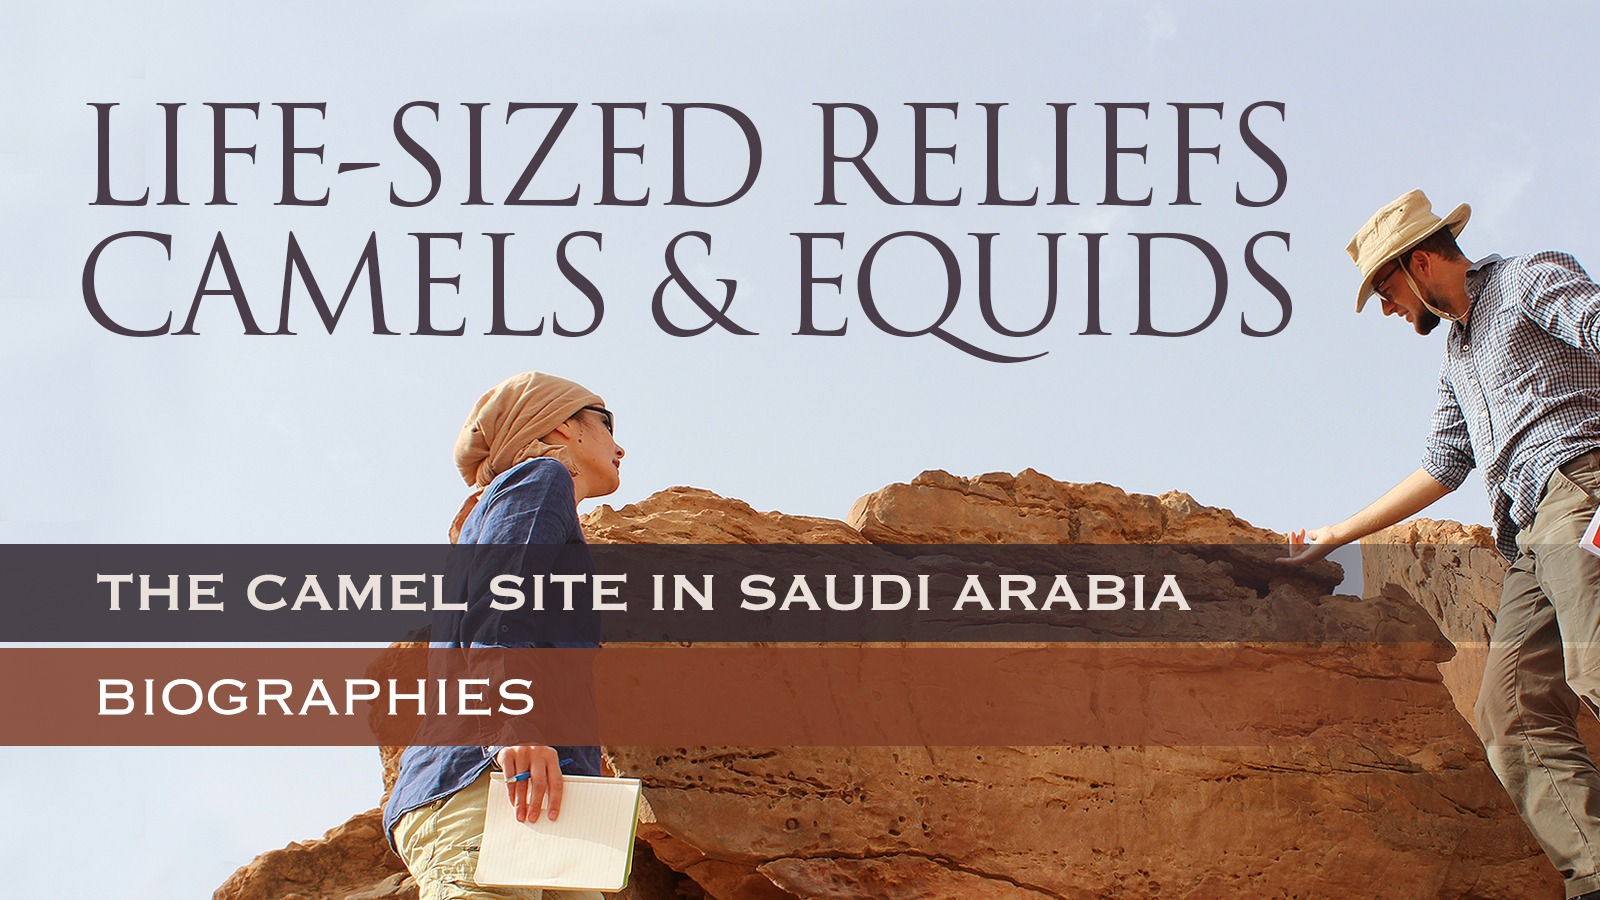 Life-sized reliefs of camels and equids: The Camel Site in Saudi Arabia